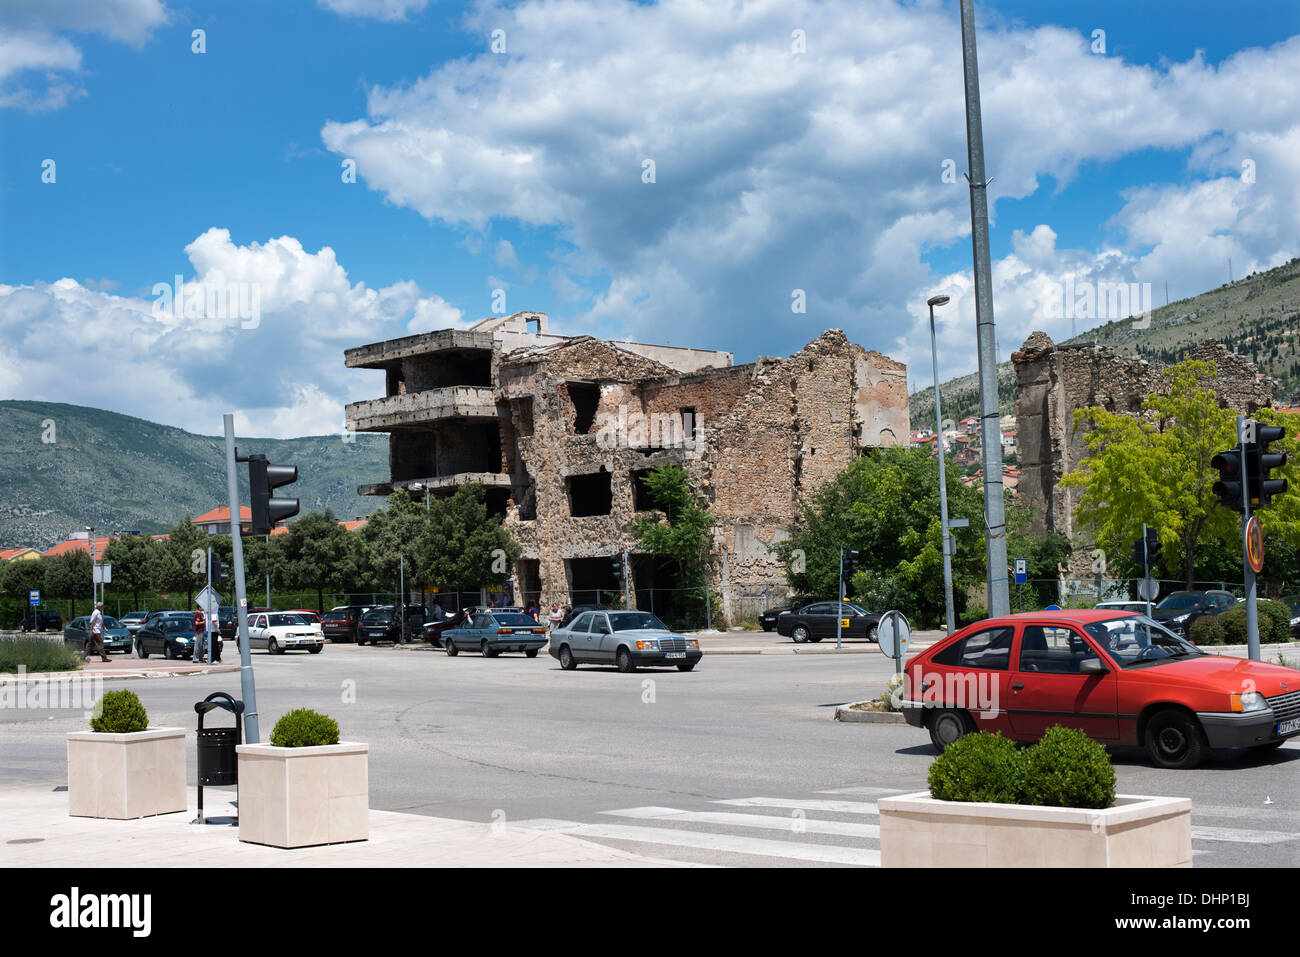 Ruined buildings can be seen everywhere in the town of Mostar. A vivid scar of the 1990s Balkan war between Croats and Bosnians. Stock Photo